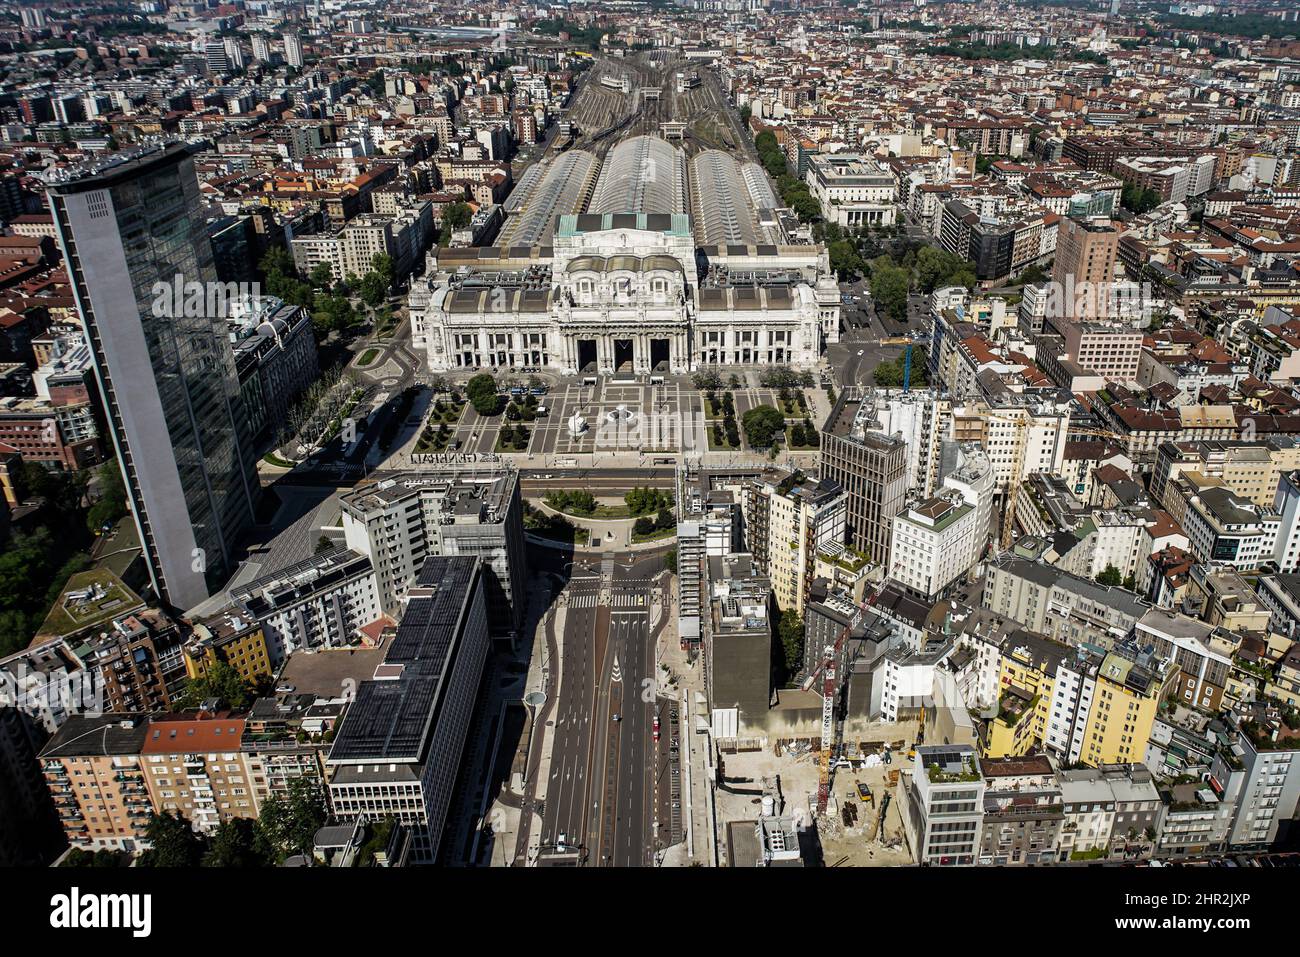 Italy, Lombardy, Milan aerial view, Stazione centrale Stock Photo